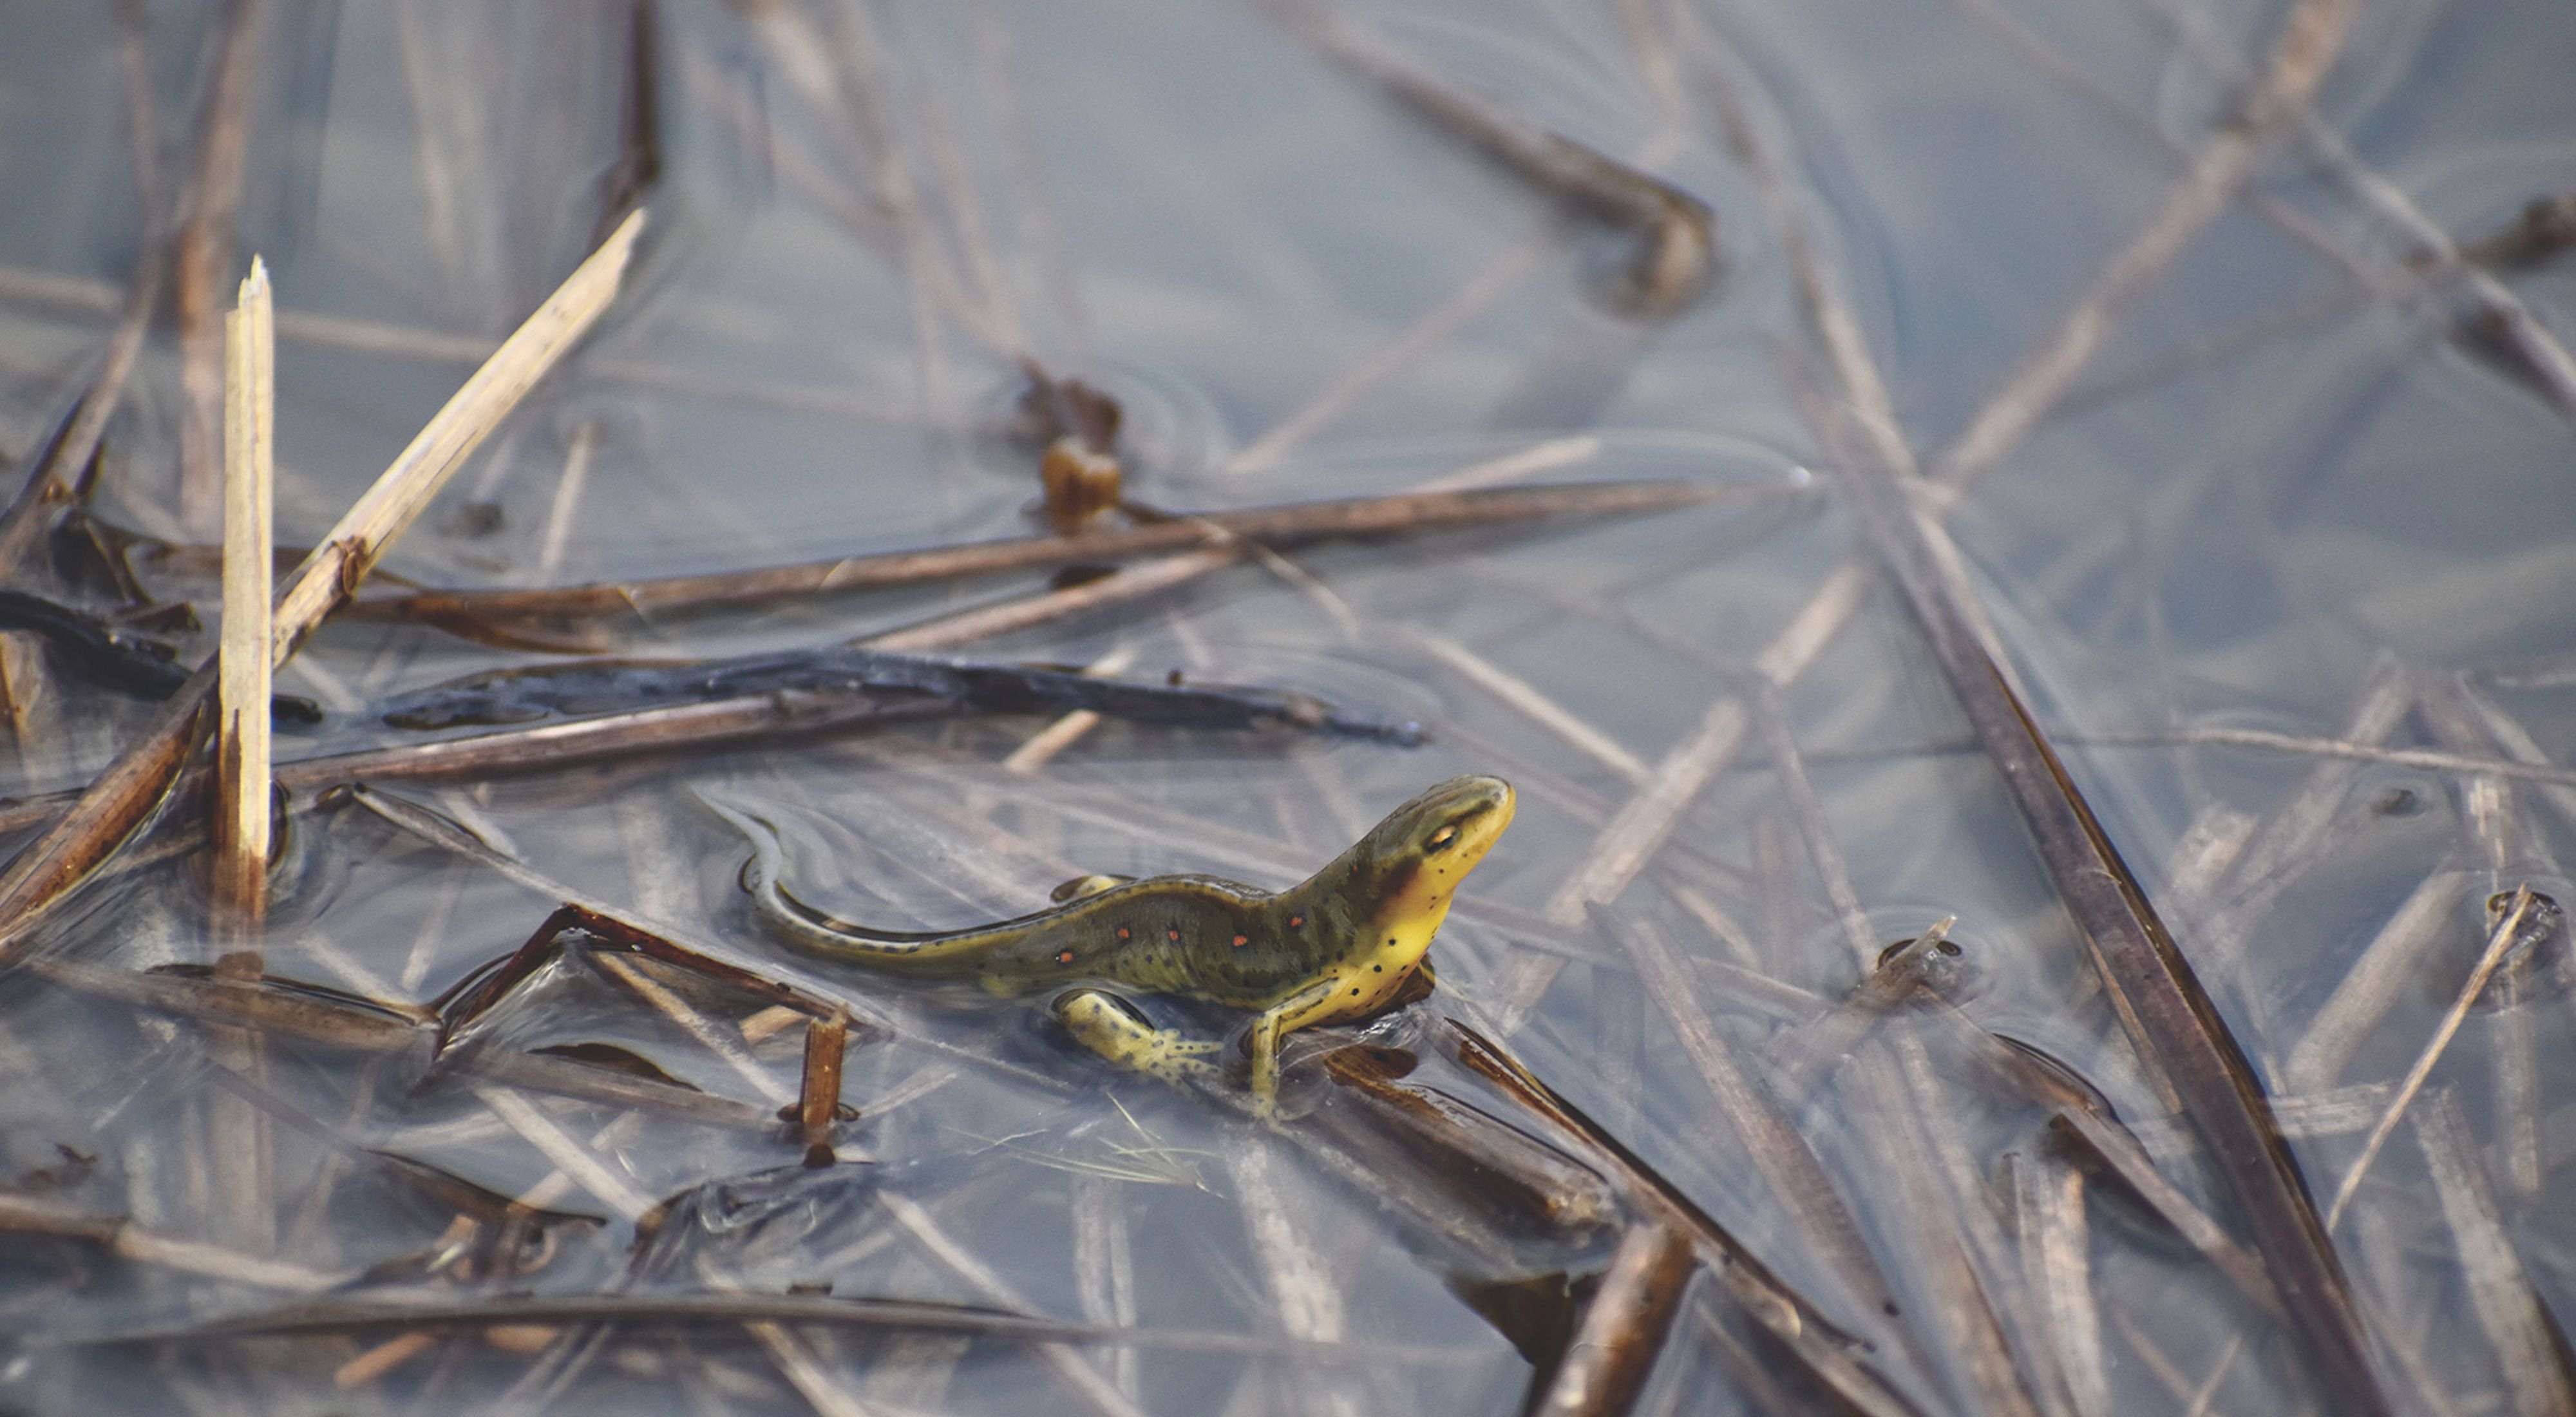 A green salamander rests on grasses in water.